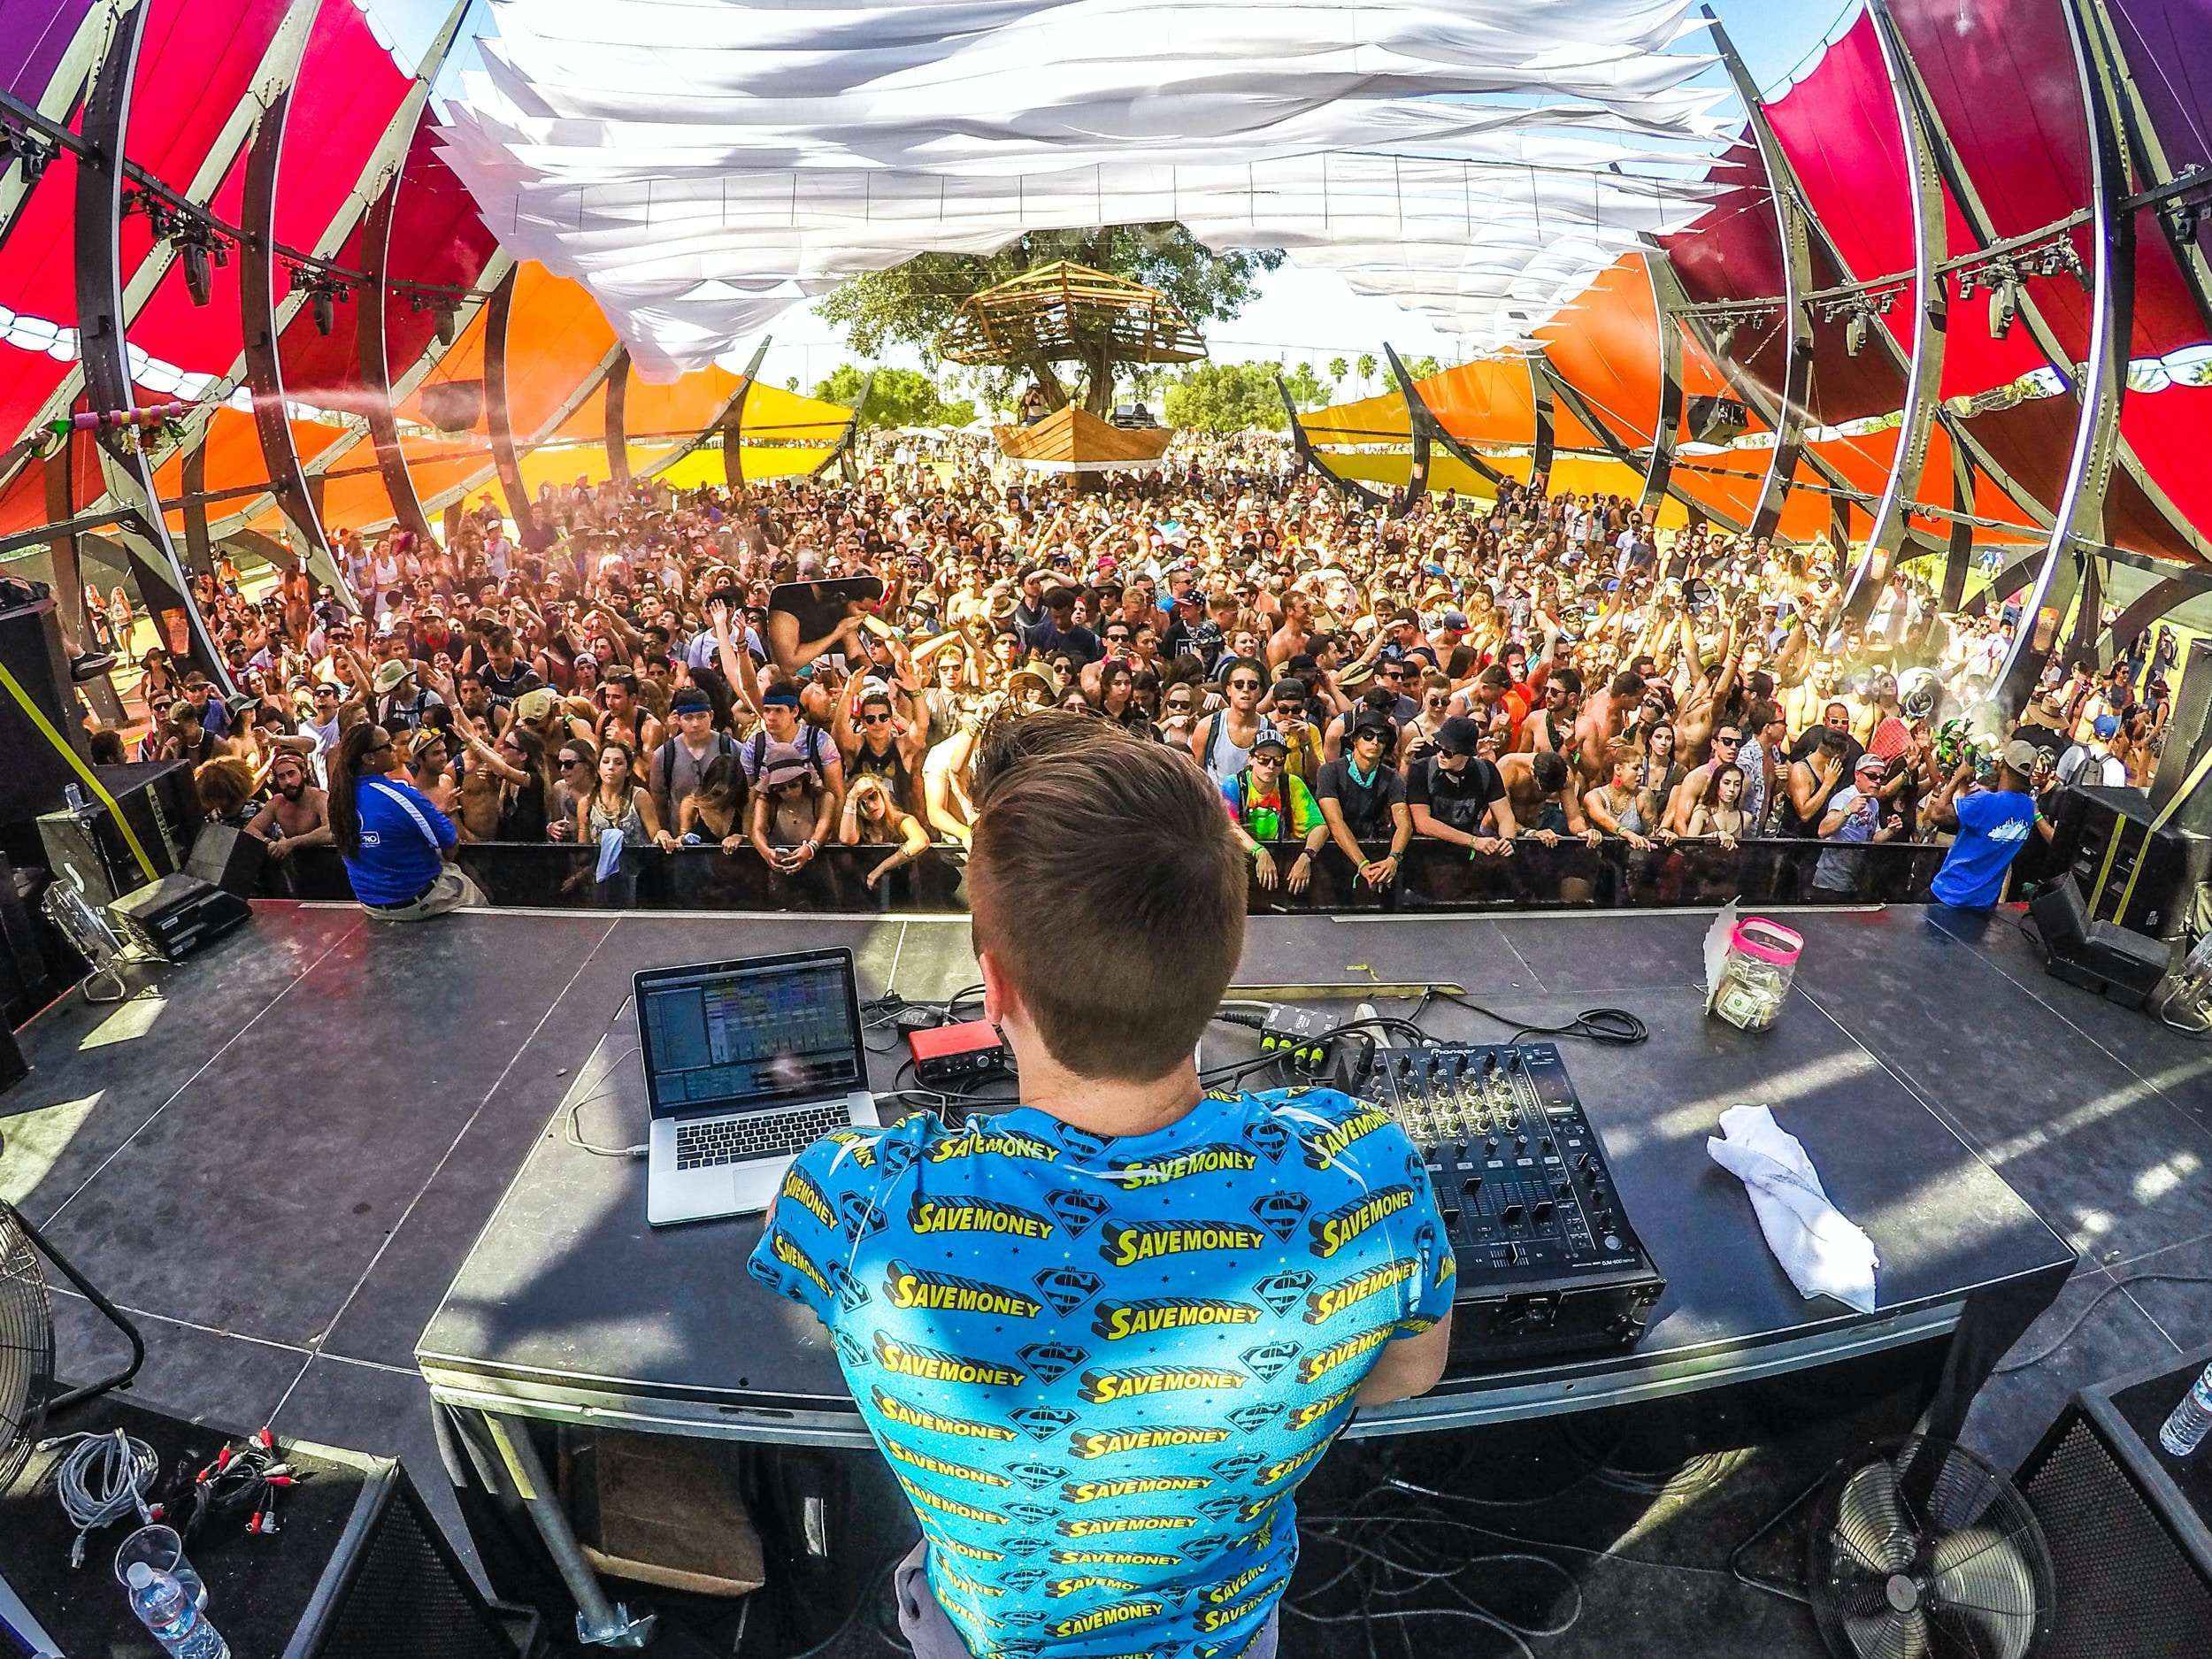 Crowd gathers in front of a DJ at a music festival